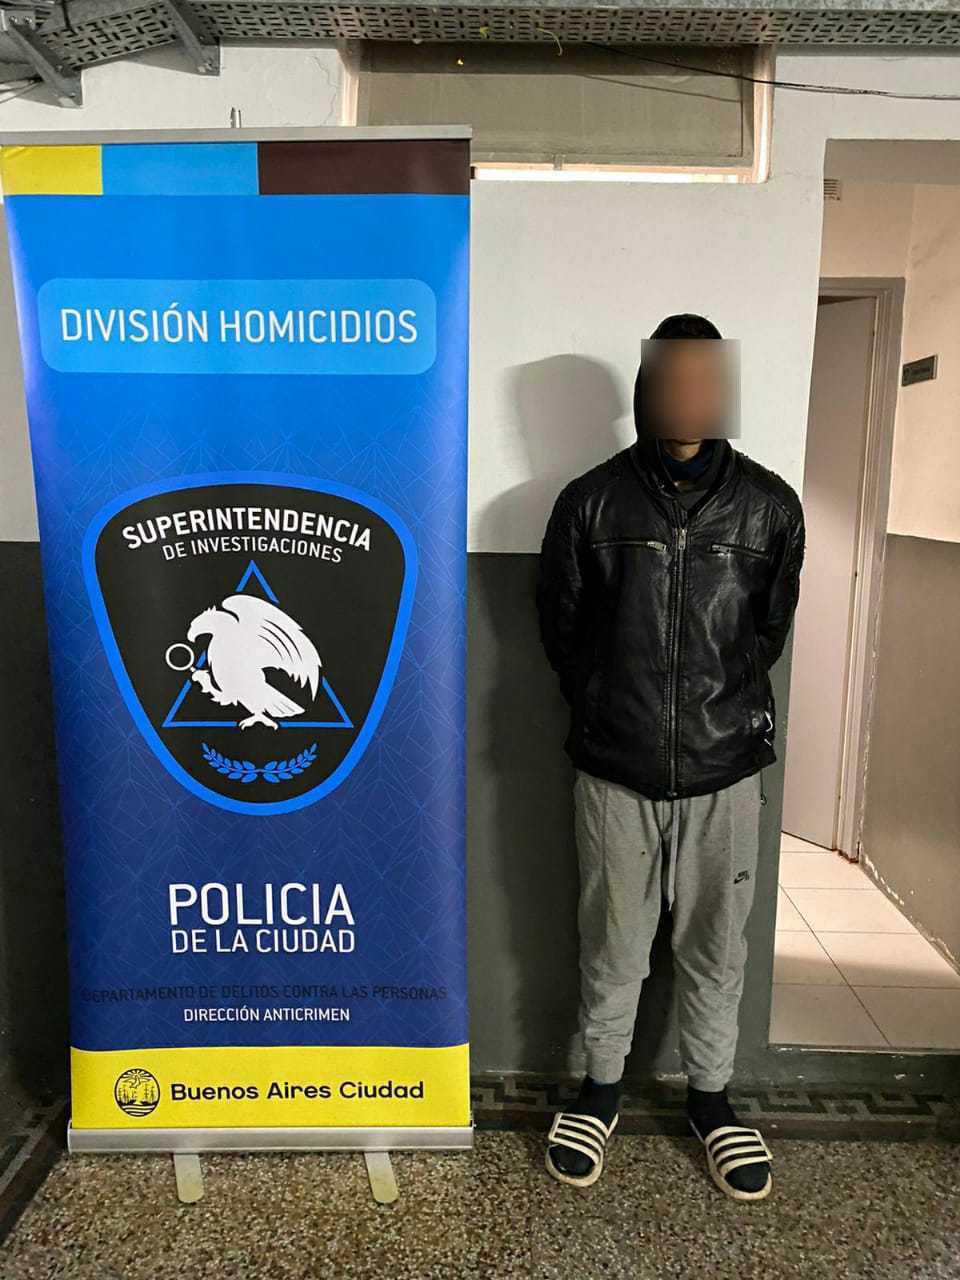 Another of the suspects arrested after the raids: two were carried out in CABA and another in Pilar